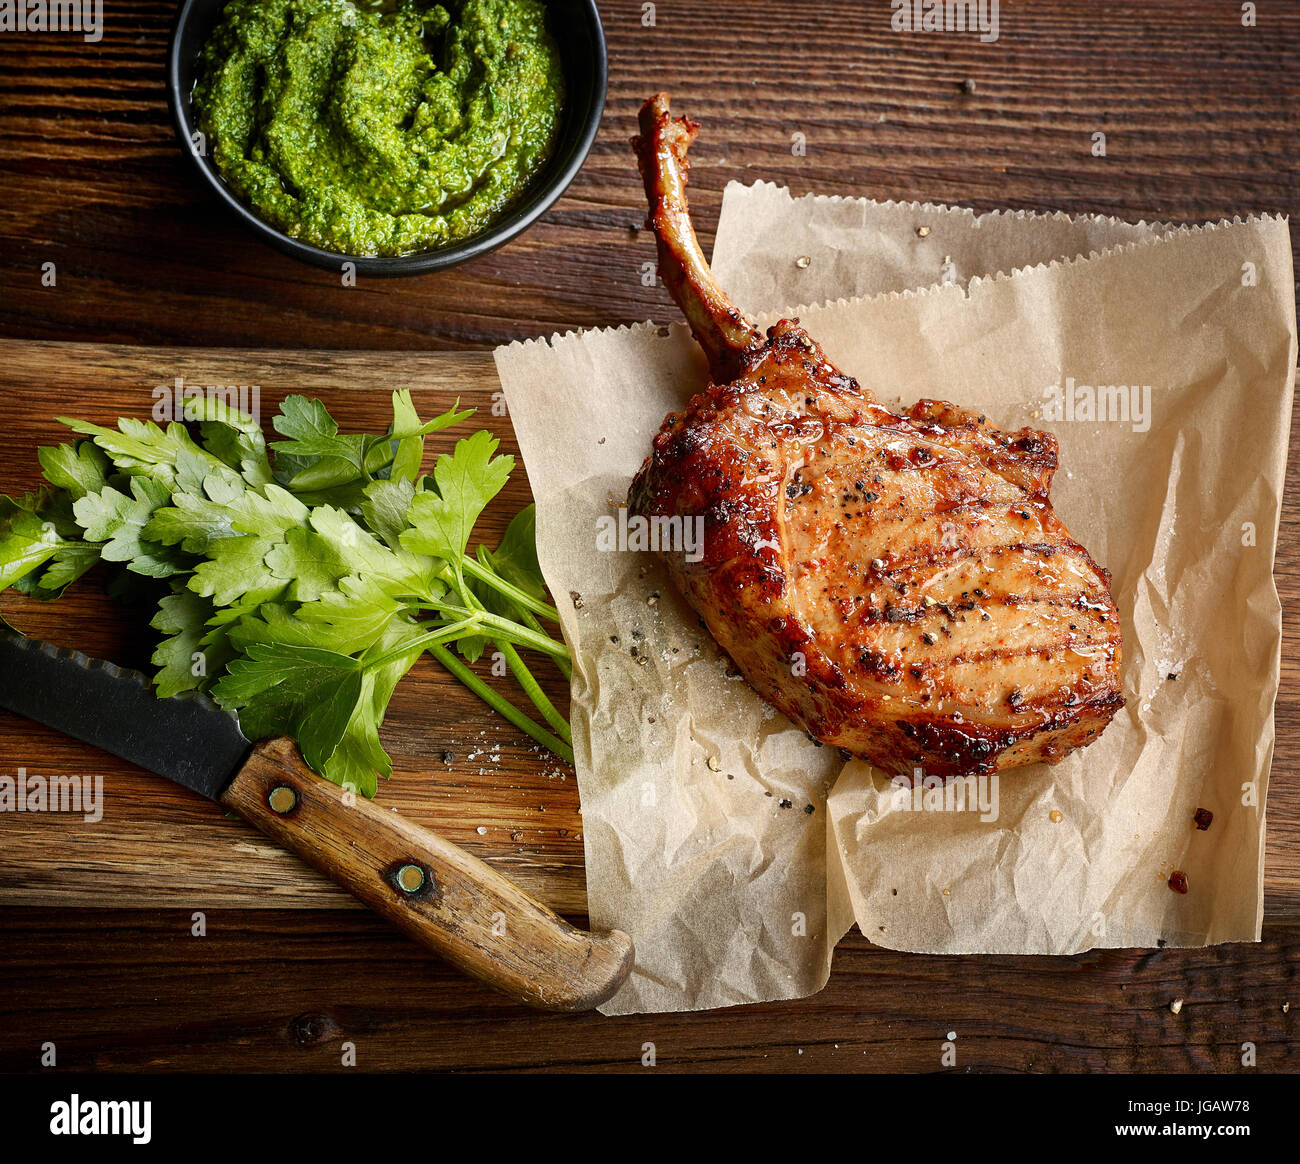 freshly grilled Tomahawk steak on wooden table, top view Stock Photo